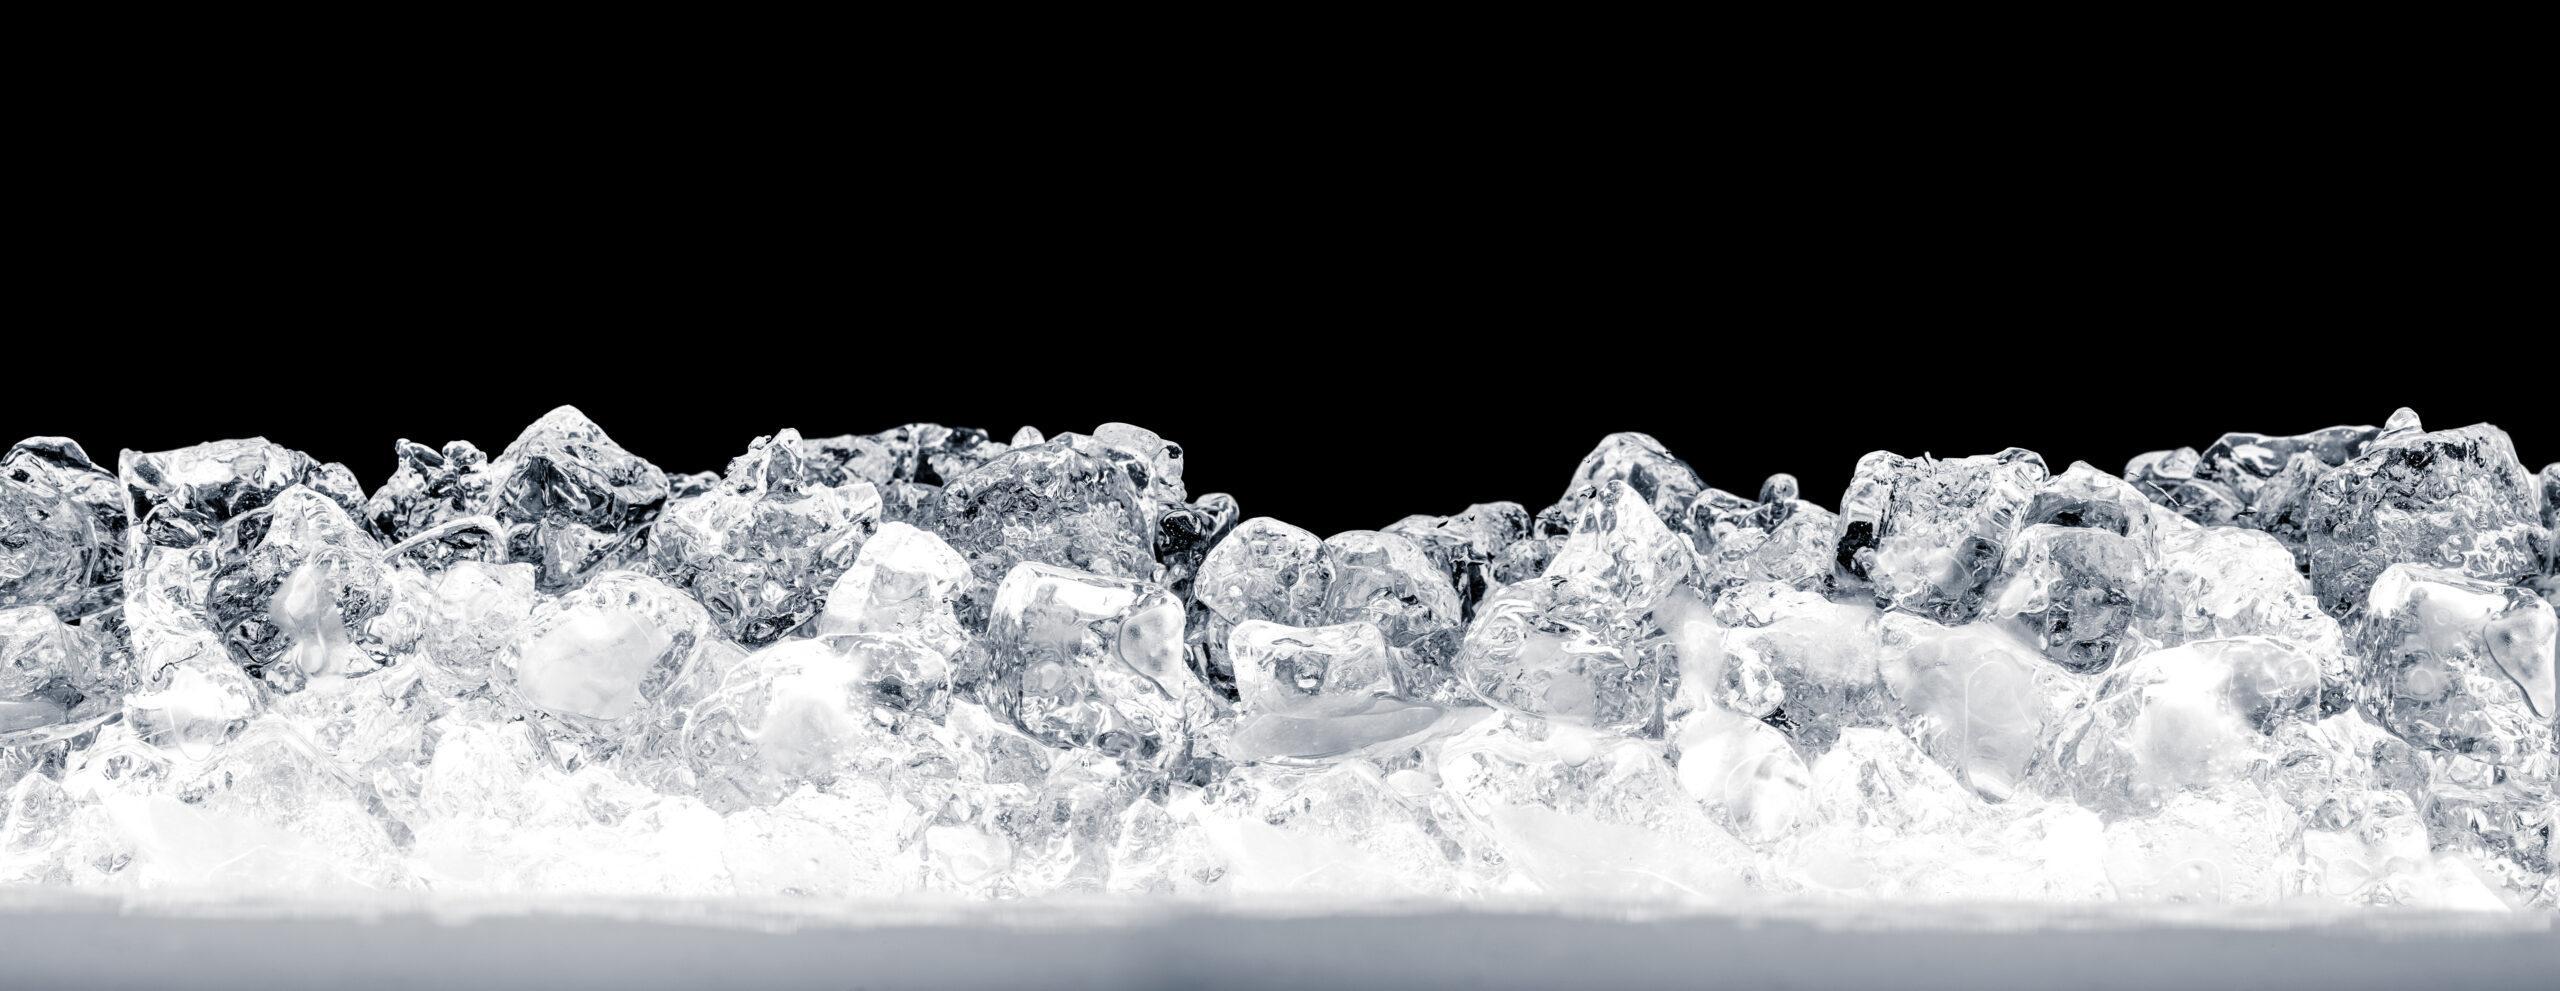 Ice Slurry - an overview